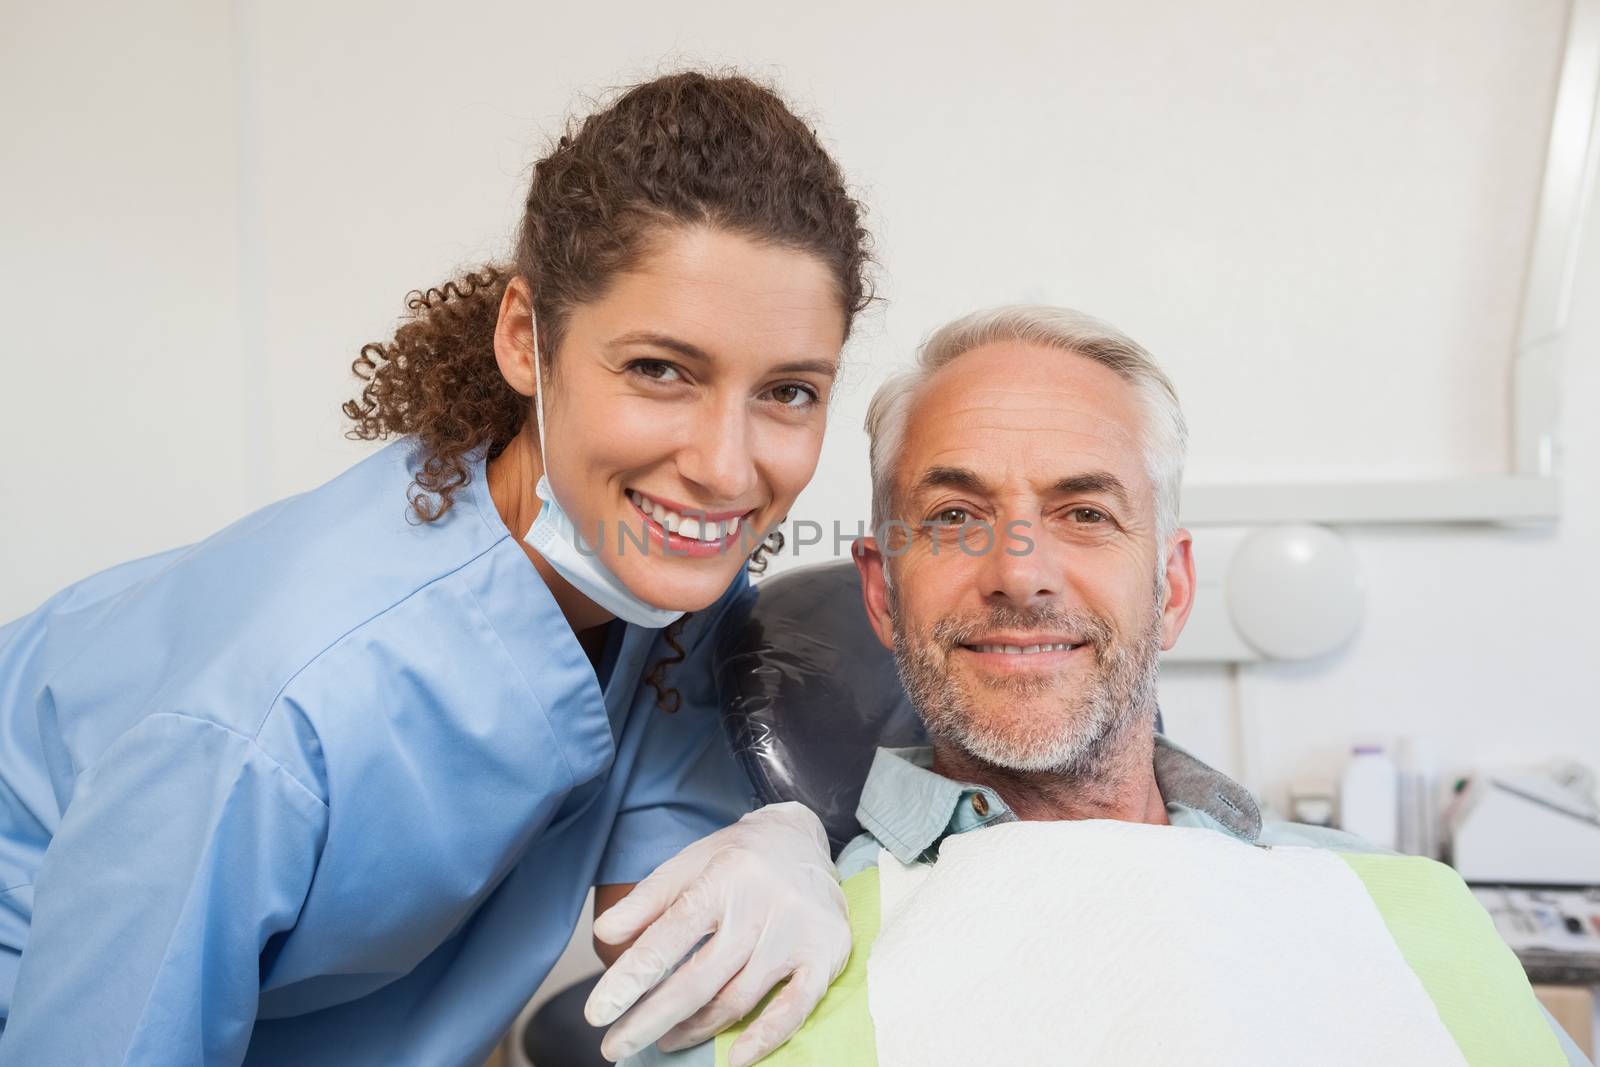 Dentist and patient smiling at camera by Wavebreakmedia